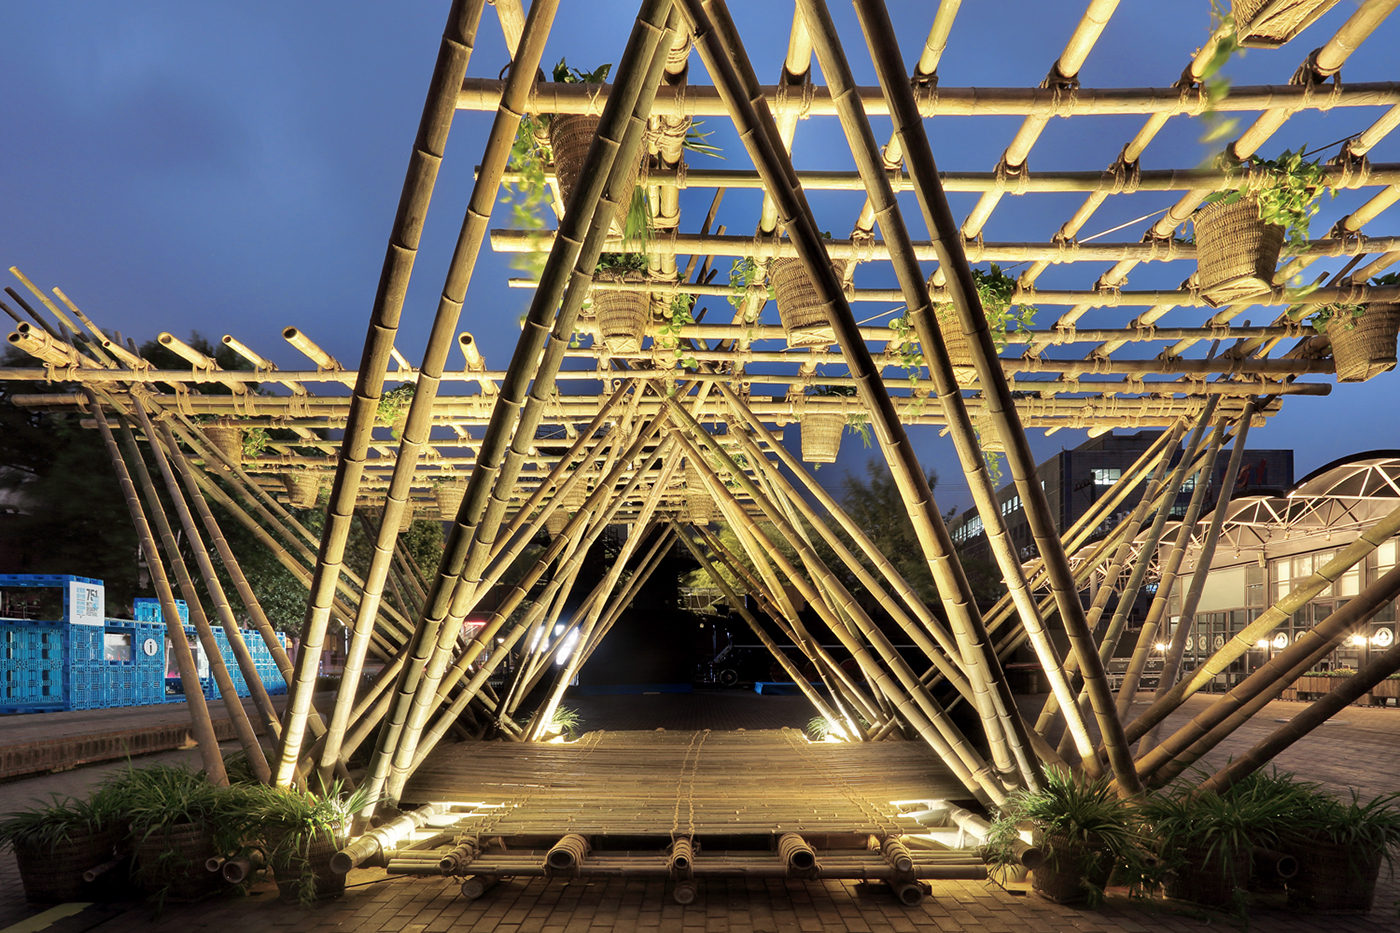 Penda bamboo structure diagrid Nature plants forest material ecological Sustainability green modular system chris